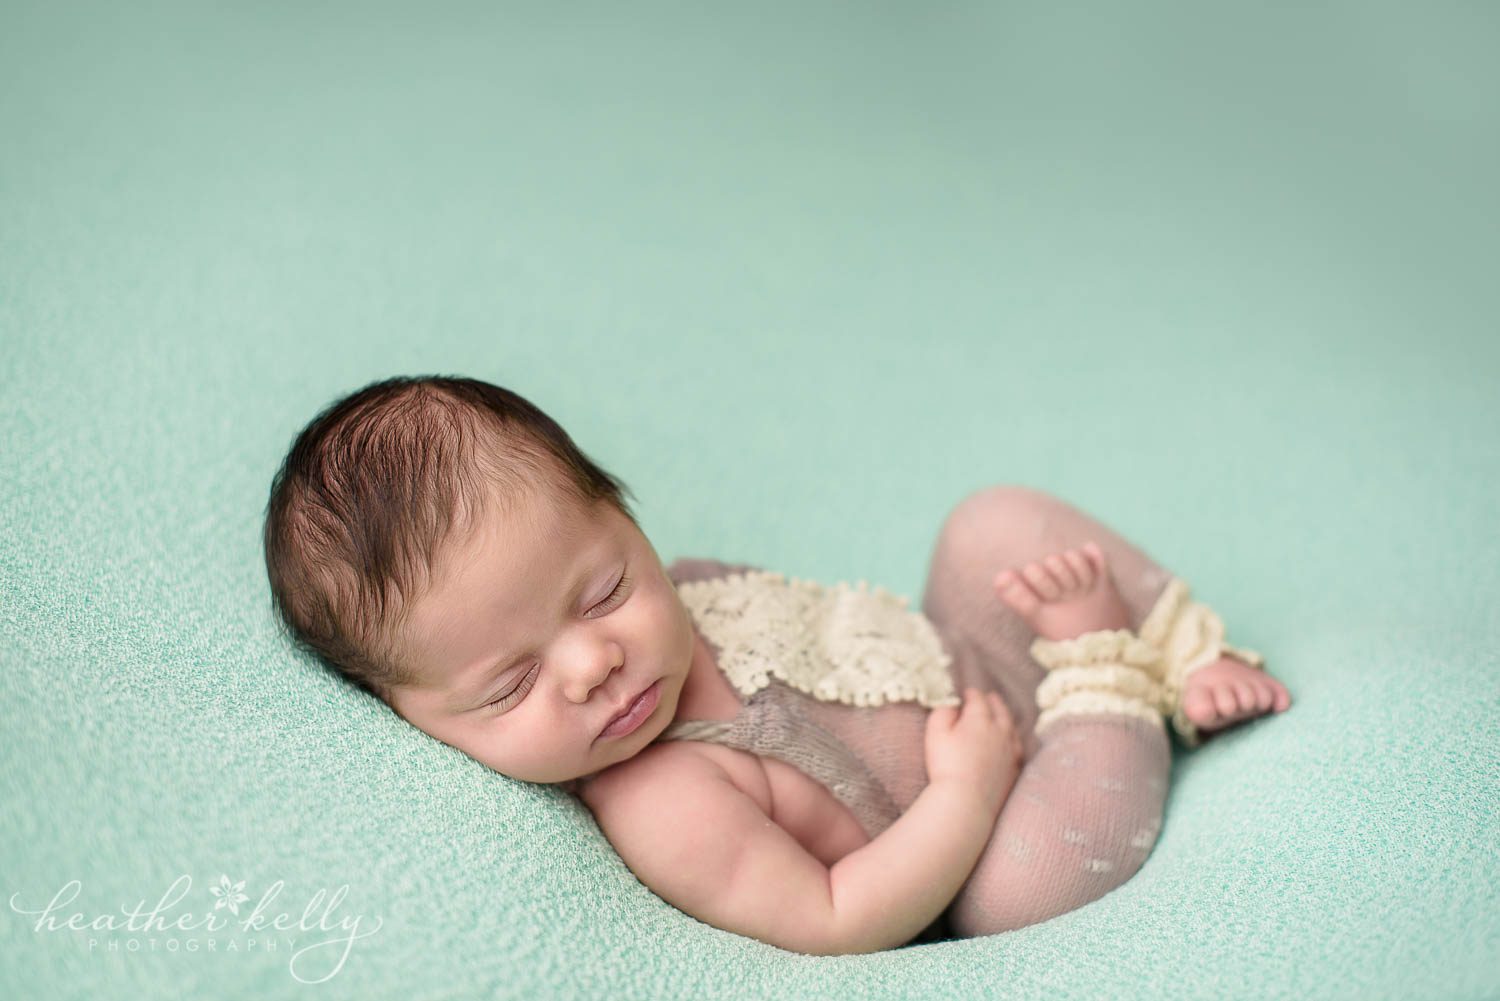 newborn photography poses. baby girl on back in outfit during newborn photography session